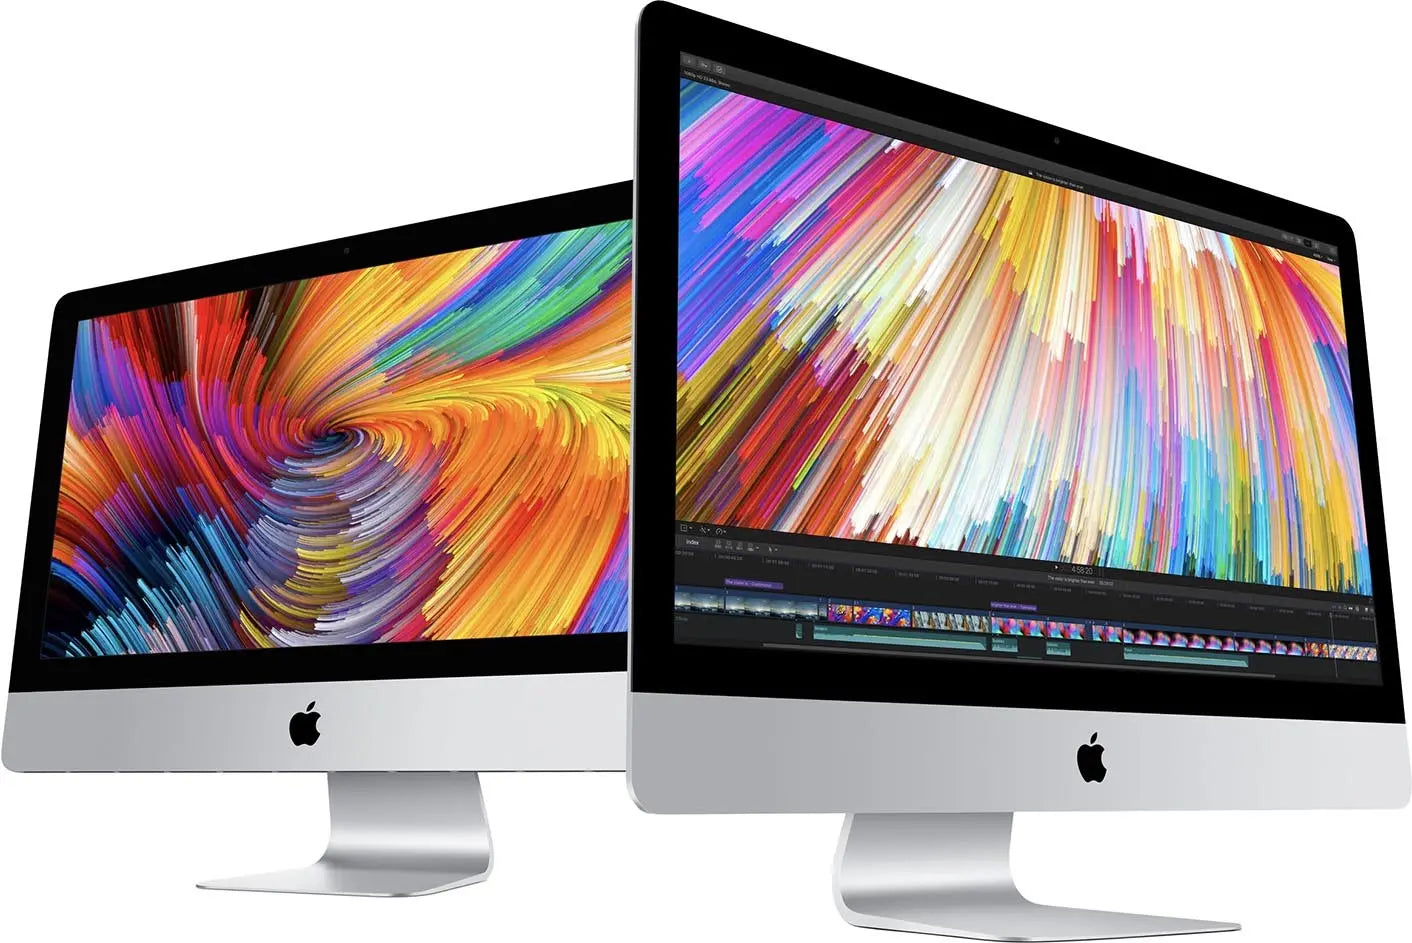 Apple 2017  iMac iMac 27" 3.8 GHz Quad-Core Intel Core i5 Fusion drive 2 TO 0190198088345 MNED2FN/A  MNED2FN Apple Computer, Inc